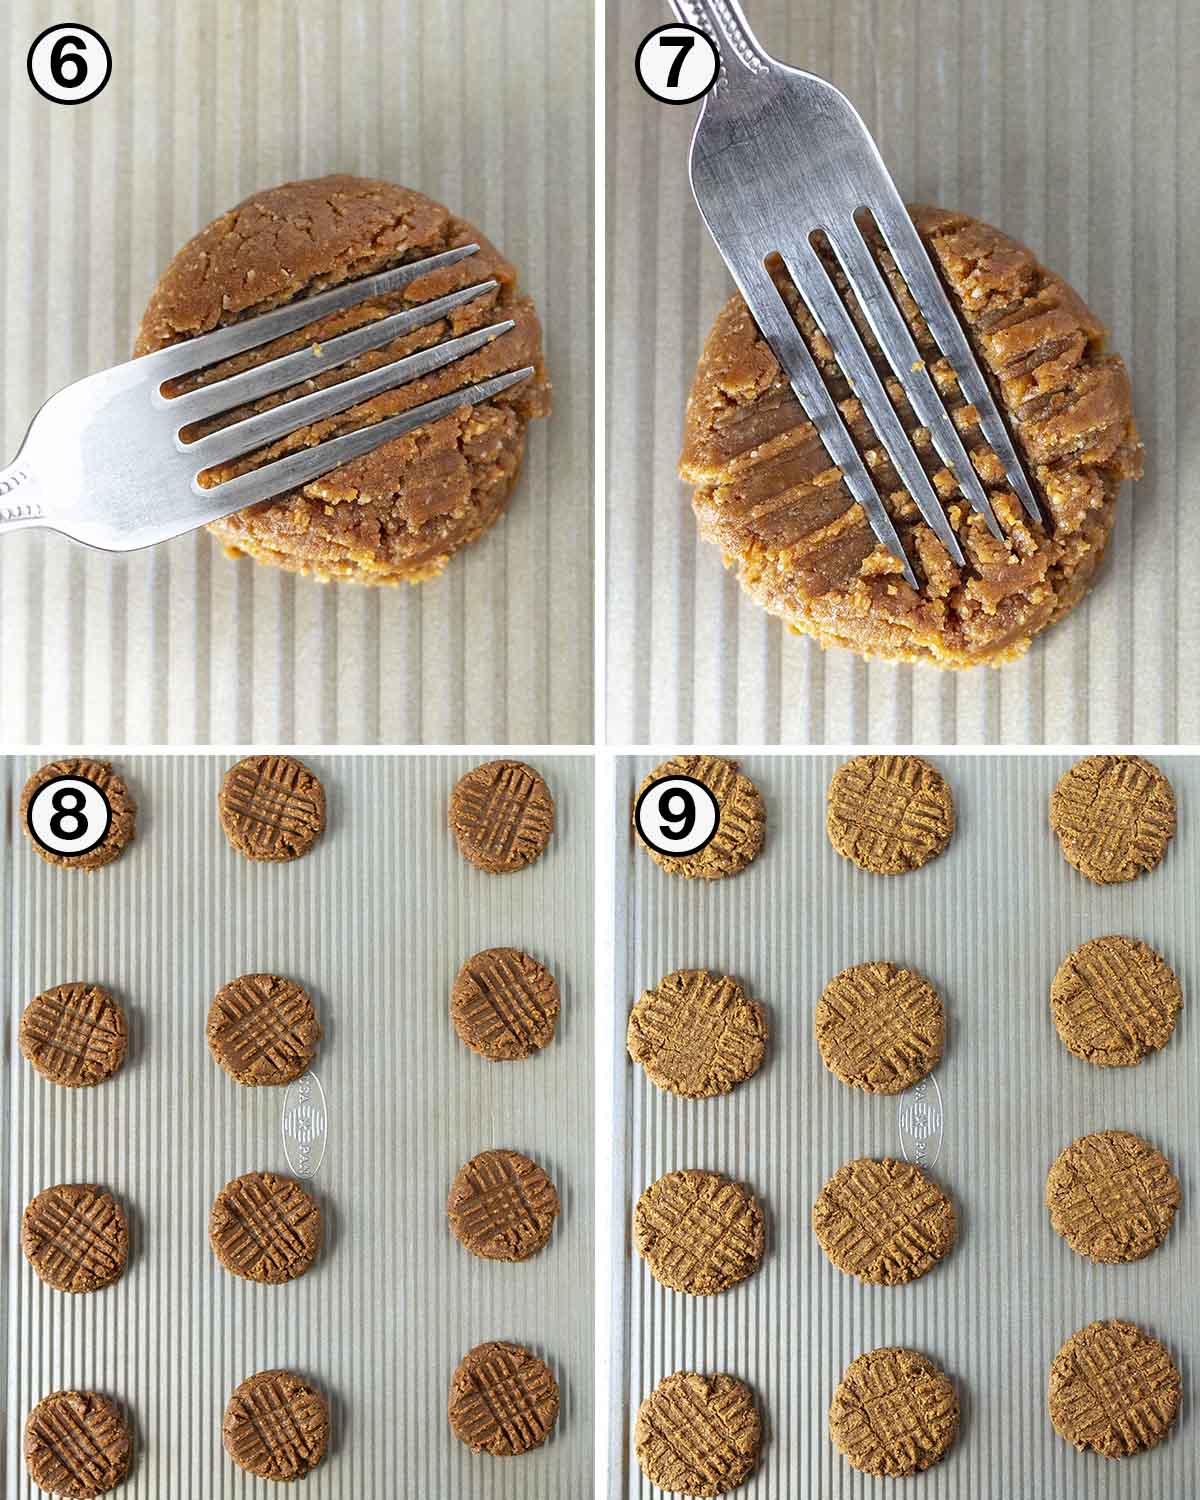 A collage of four images showing the second sequence of steps needed to make egg-free almond flour peanut butter cookies.